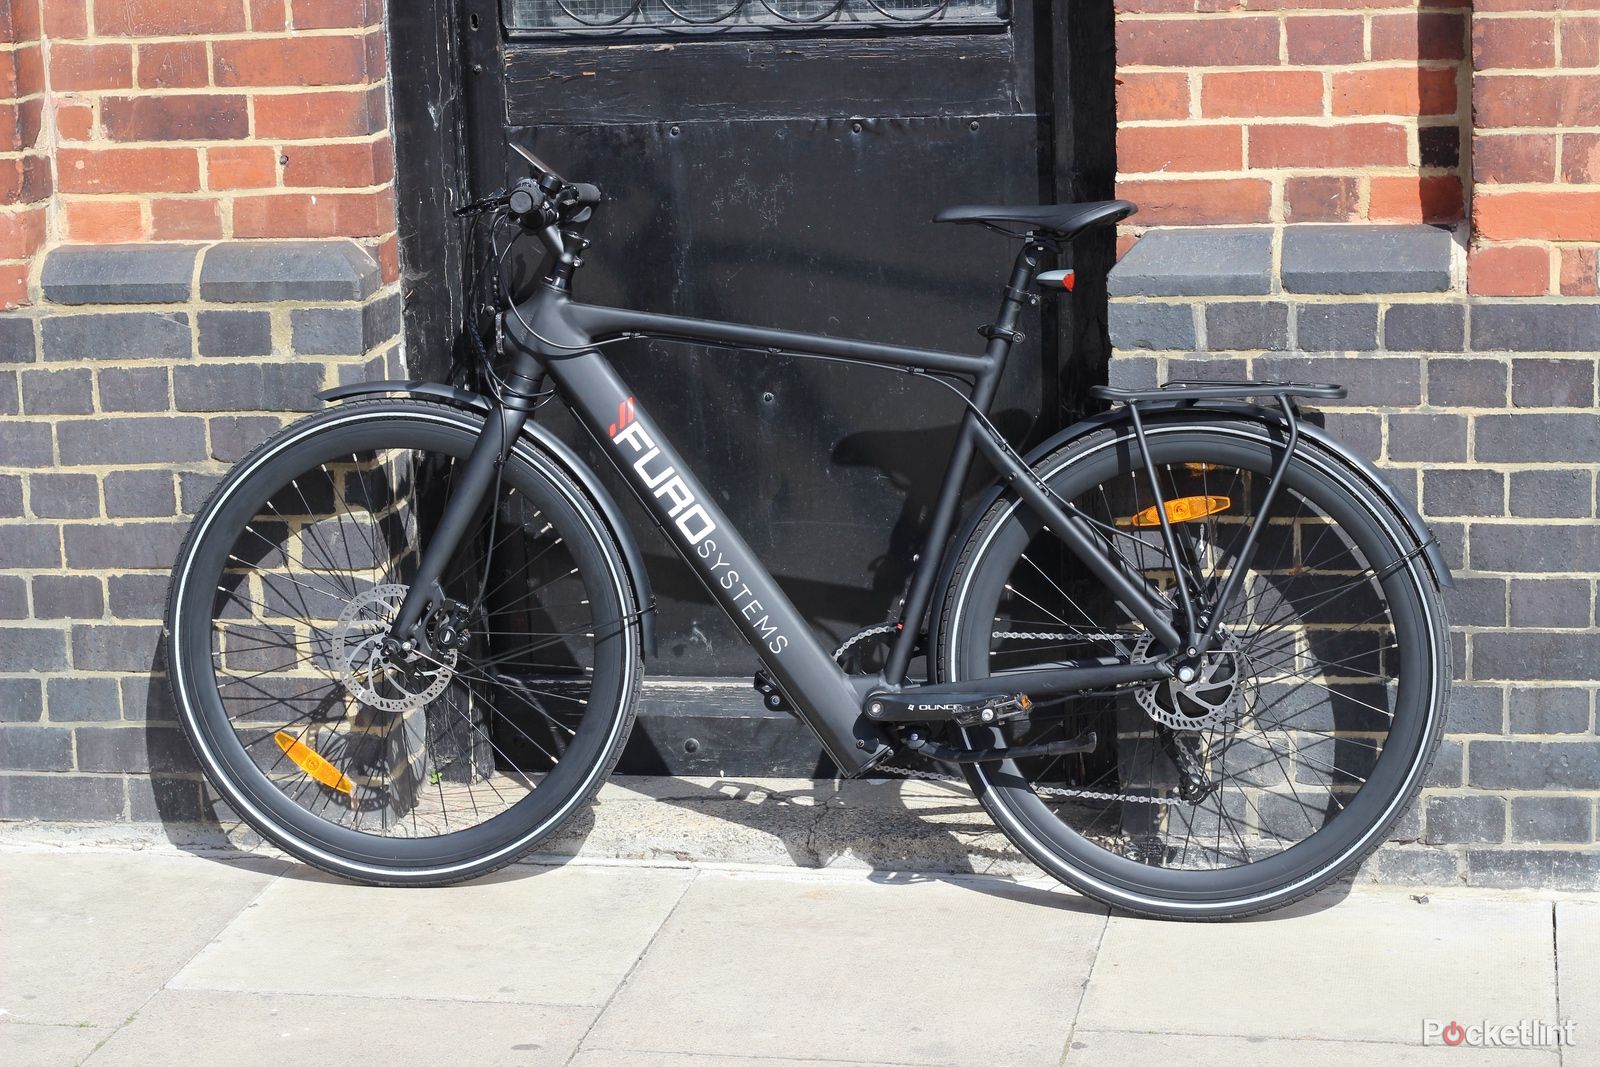 FuroSystems Aventa e-bike review: Affordability is its ace